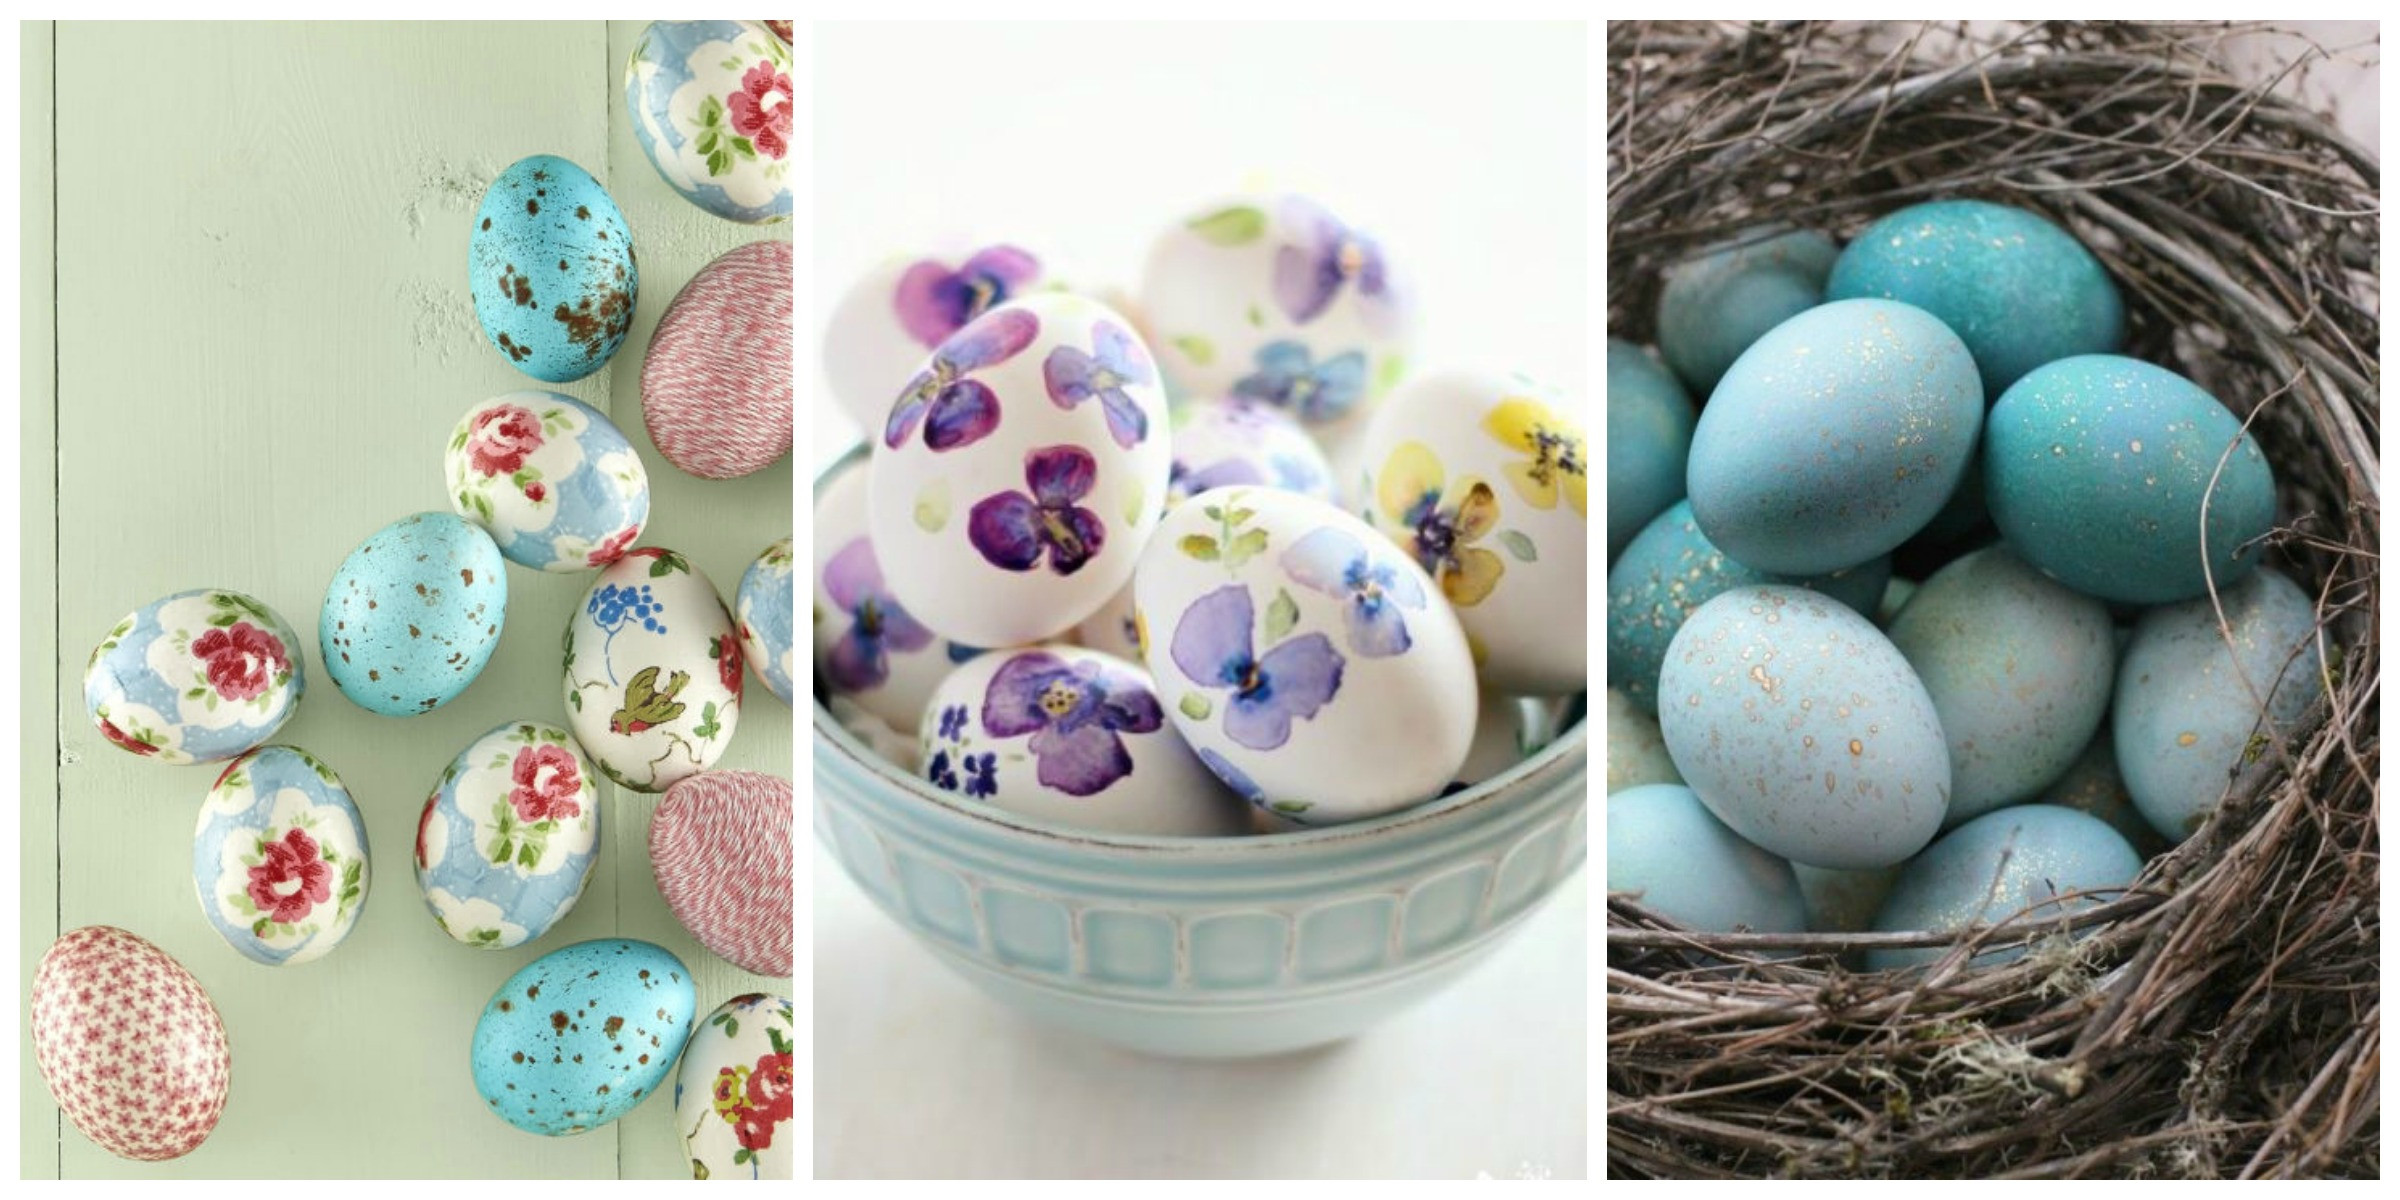 Ideas For Easter Eggs
 60 Fun Easter Egg Designs Creative Ideas for Decorating